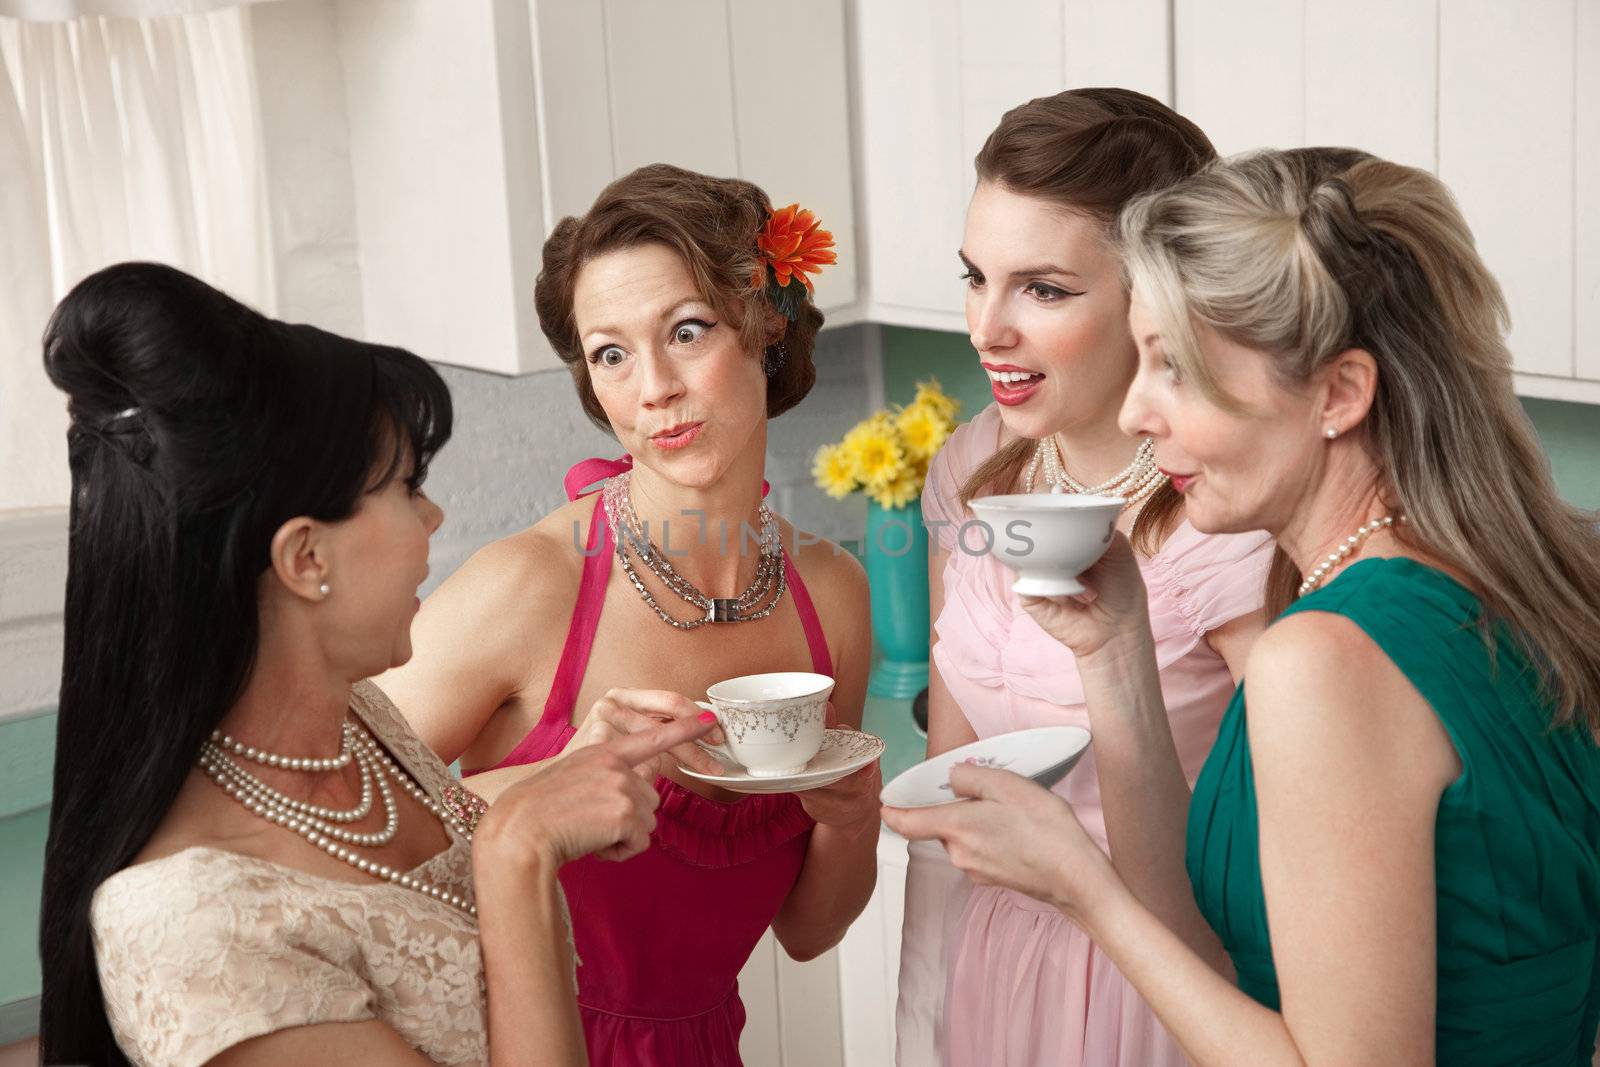 Four retro-styled women chit-chat over coffee in a kitchen